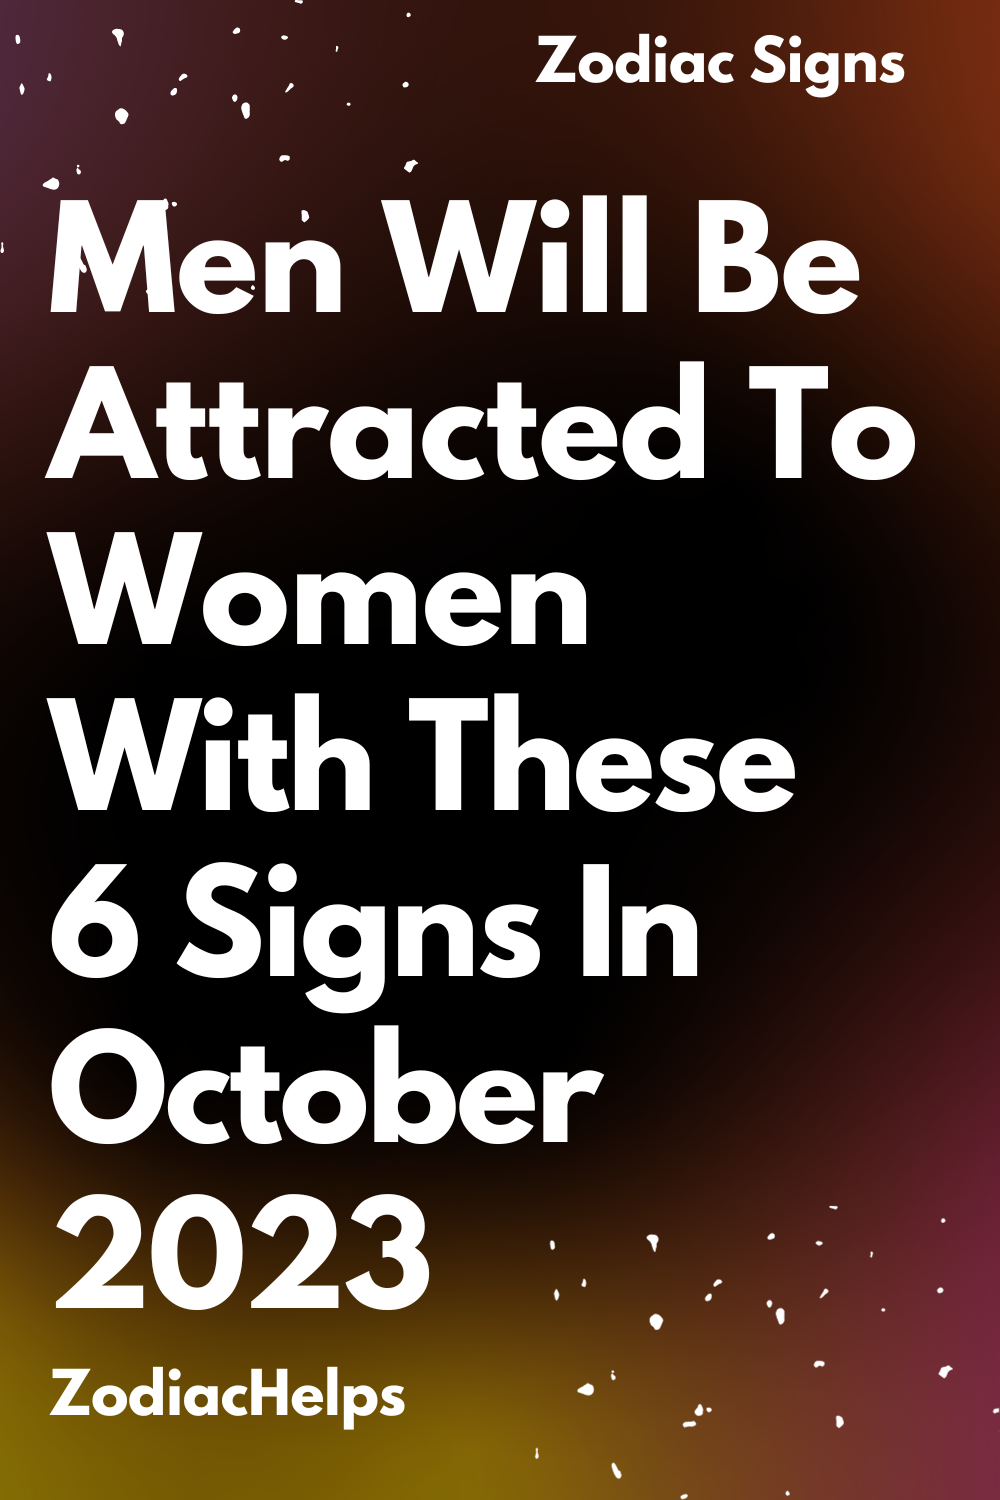 Men Will Be Attracted To Women With These 6 Signs In October 2023